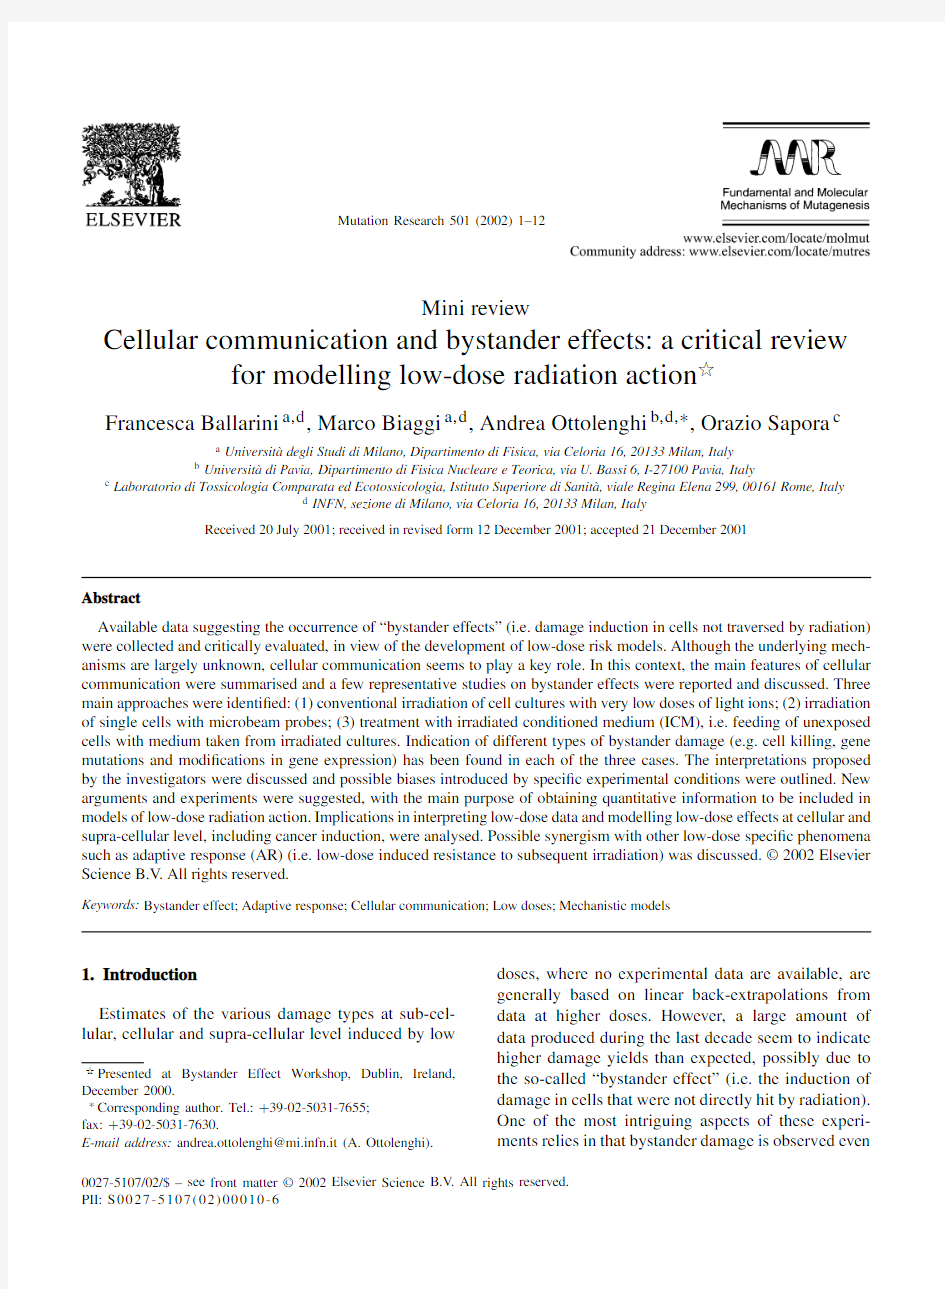 Cellular communication and bystander effects a critical review